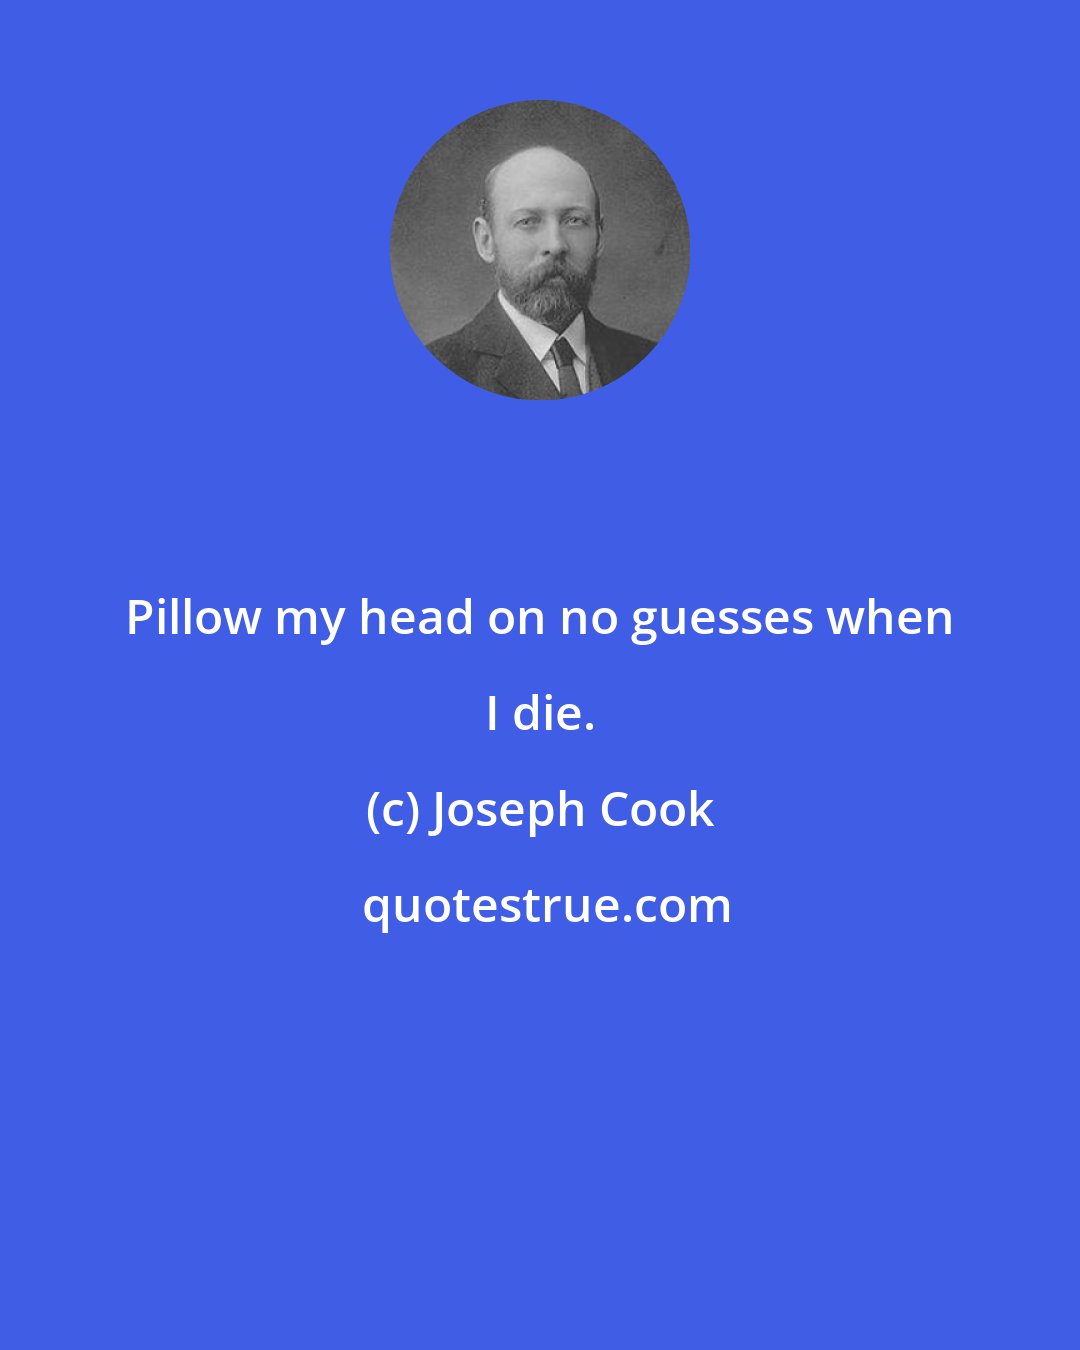 Joseph Cook: Pillow my head on no guesses when I die.